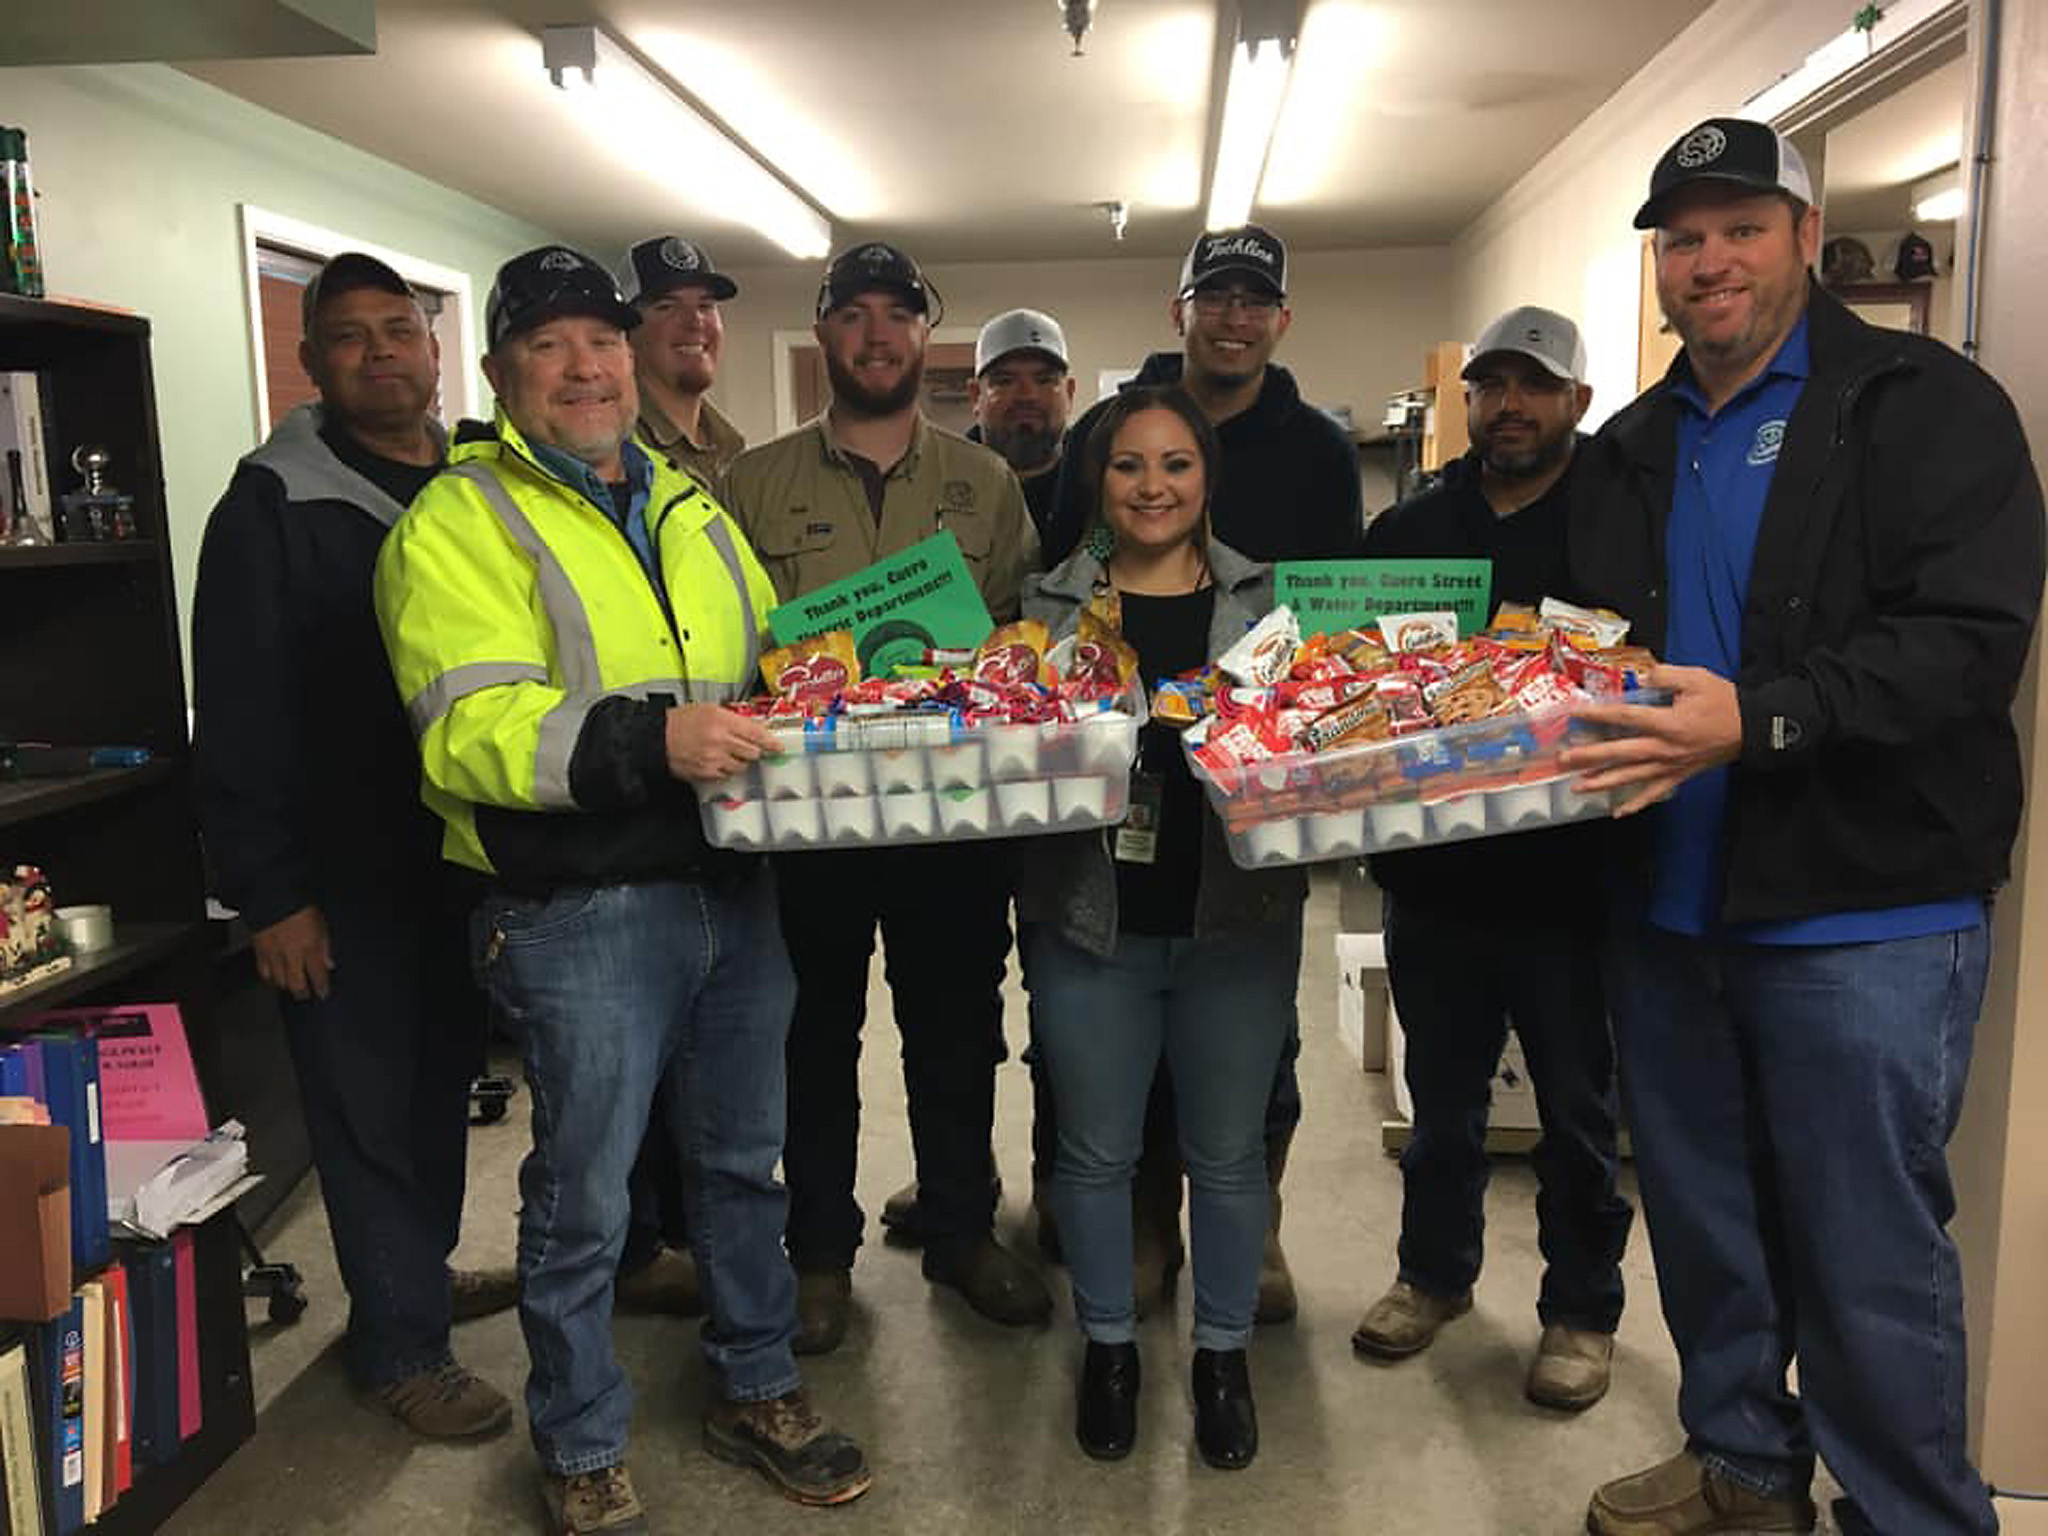 December Events Committee presents “thank you” snack care package to City of Cuero Electrical Department